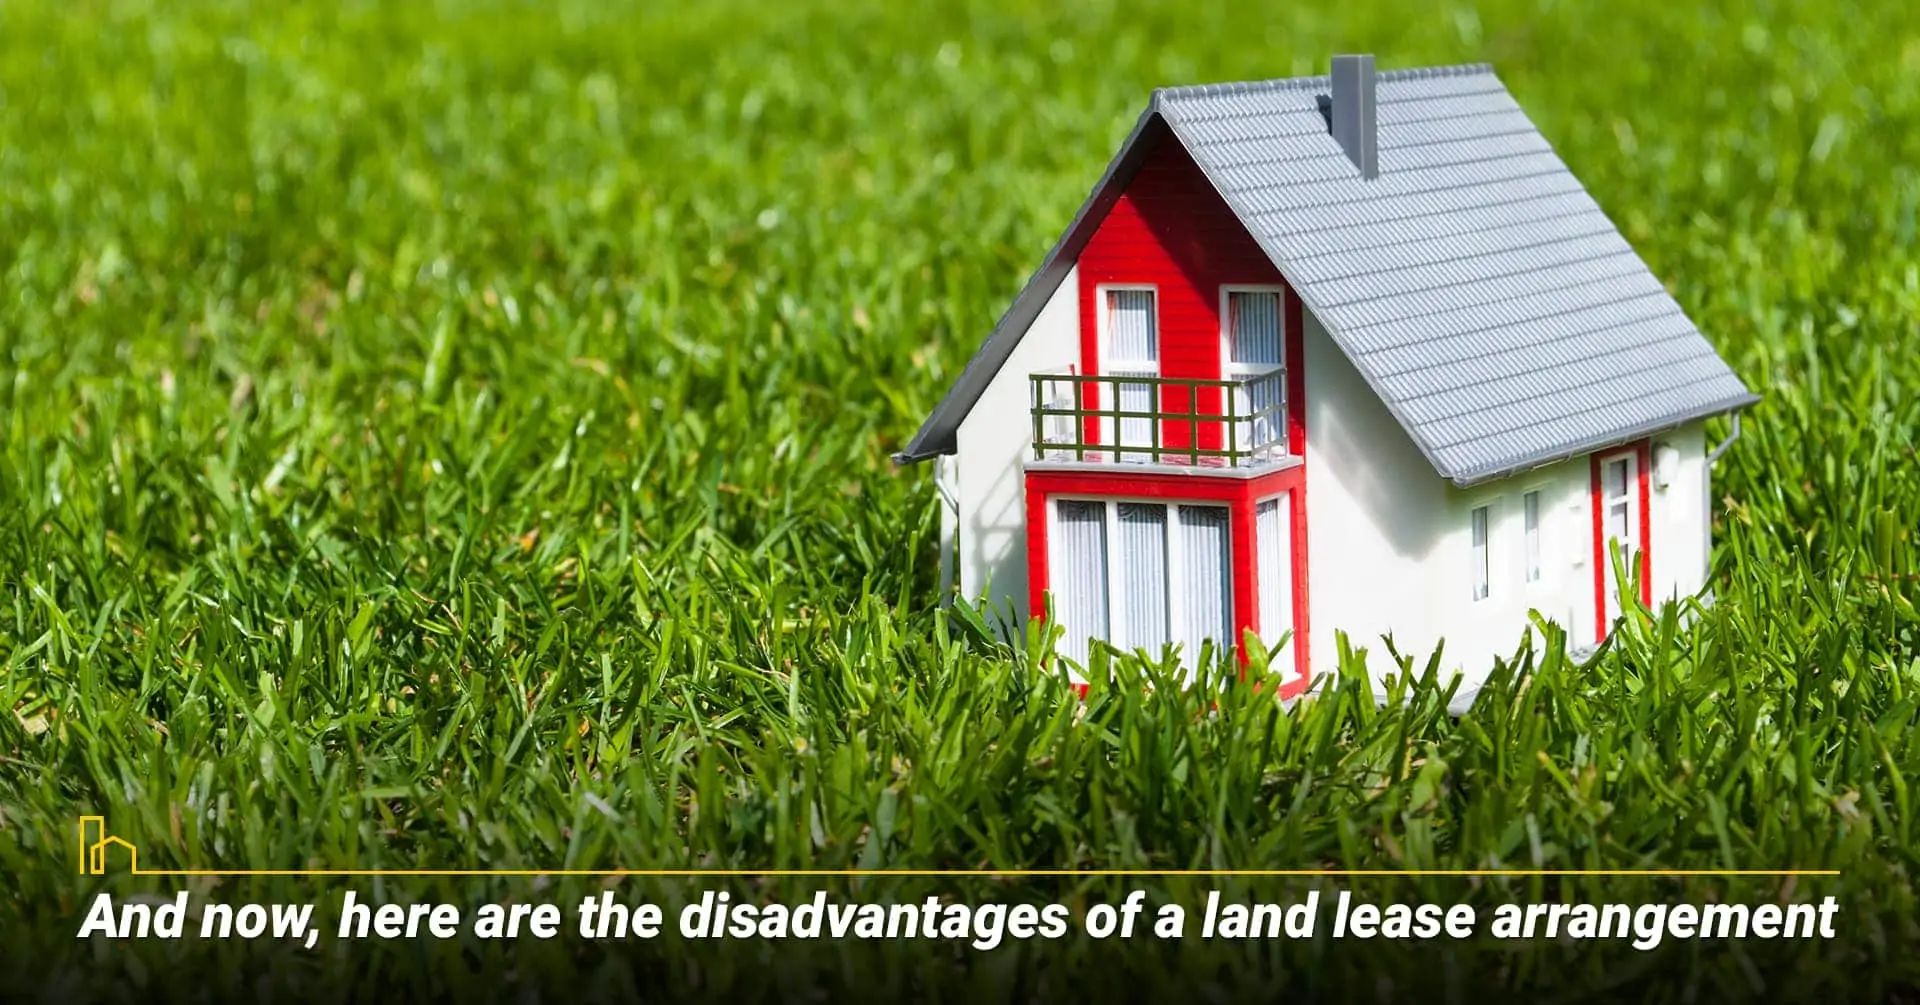 And now, here are the disadvantages of a land lease arrangement, the cons of a land lease agreement